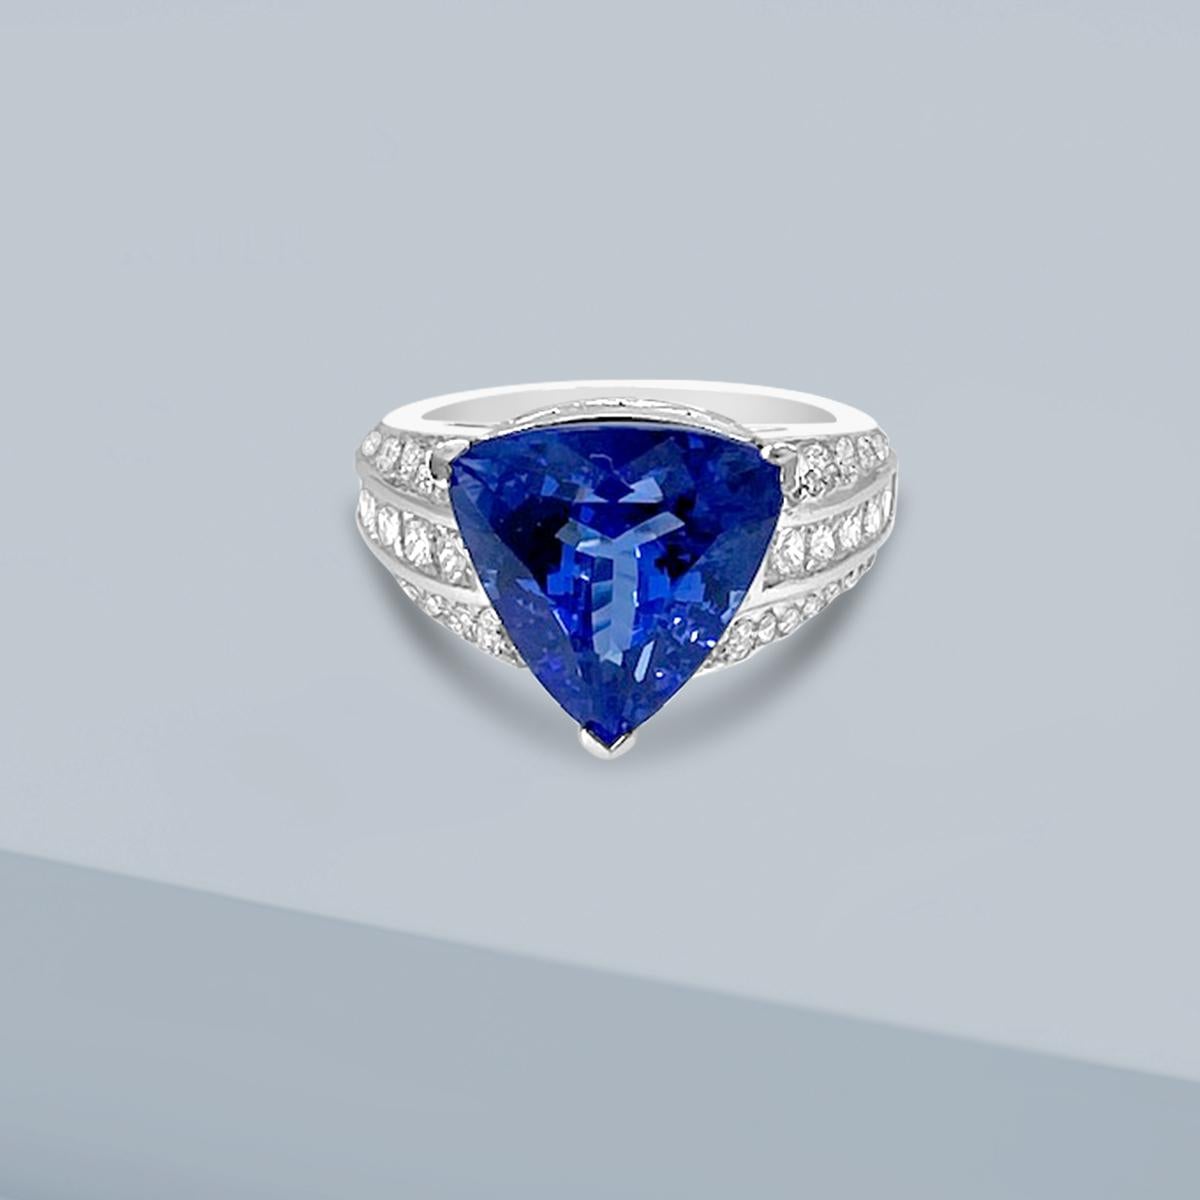 Trillion Cut 14K White Gold 7.06cts Tanzanite and Diamond Ring. Style# R1663 For Sale